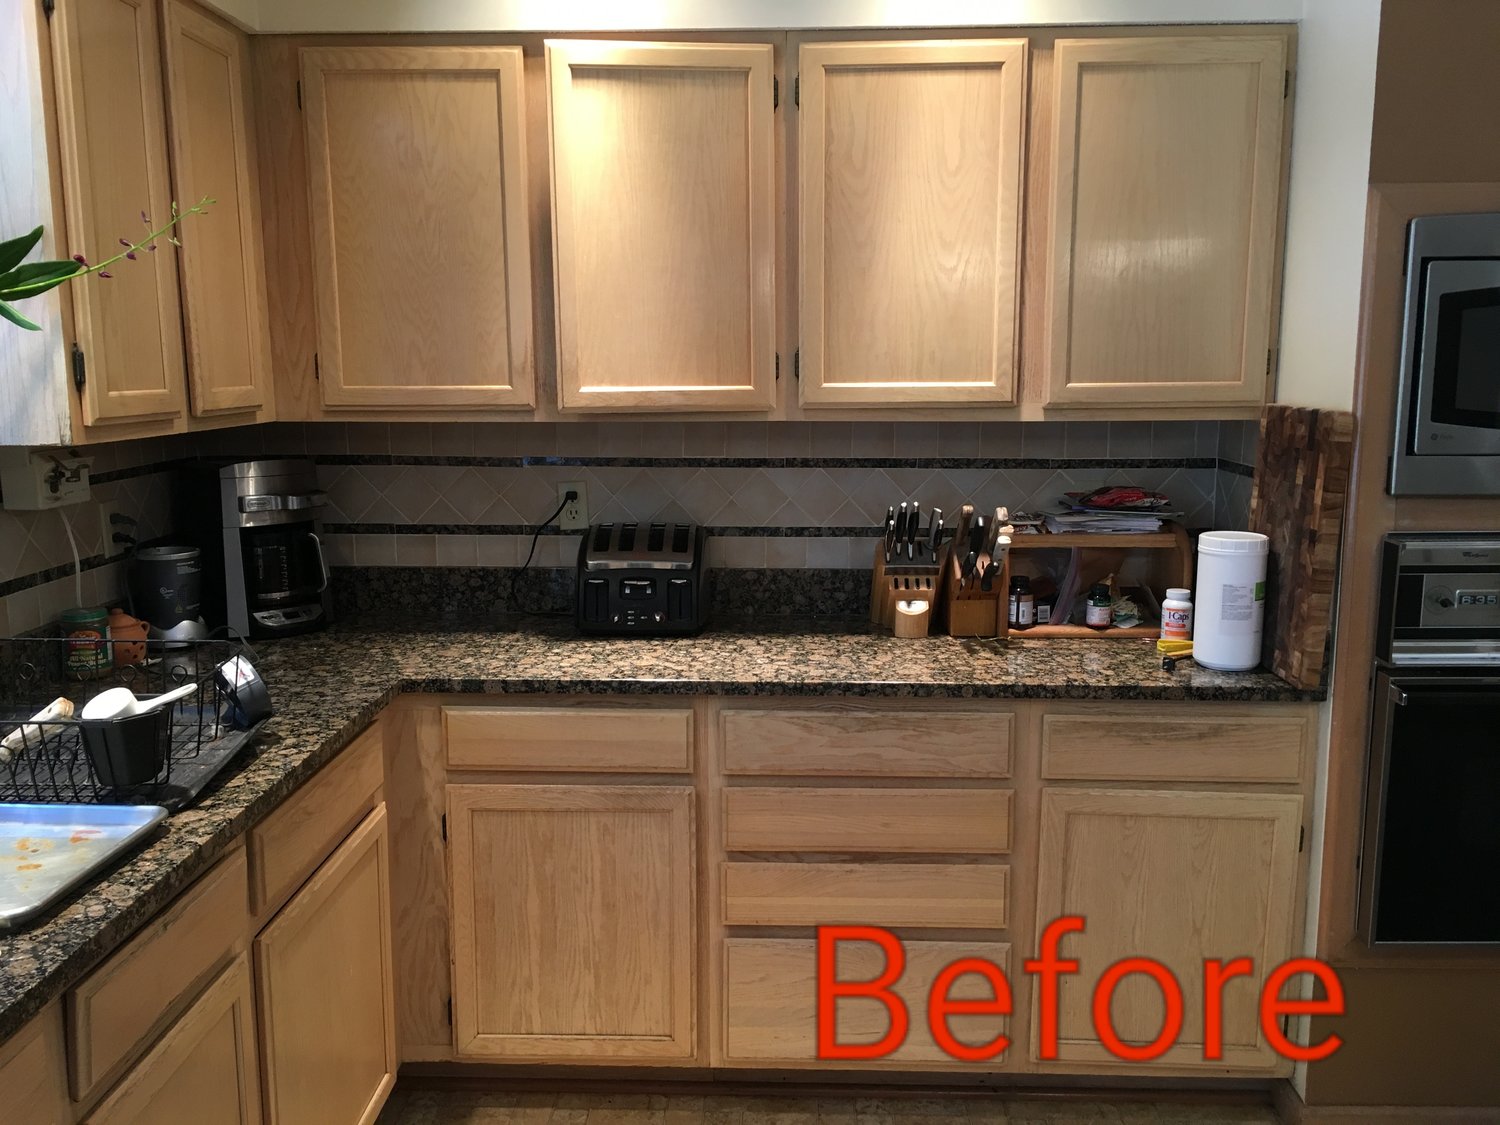 Refacing Pickled Oak Cabinets | Cabinets Matttroy